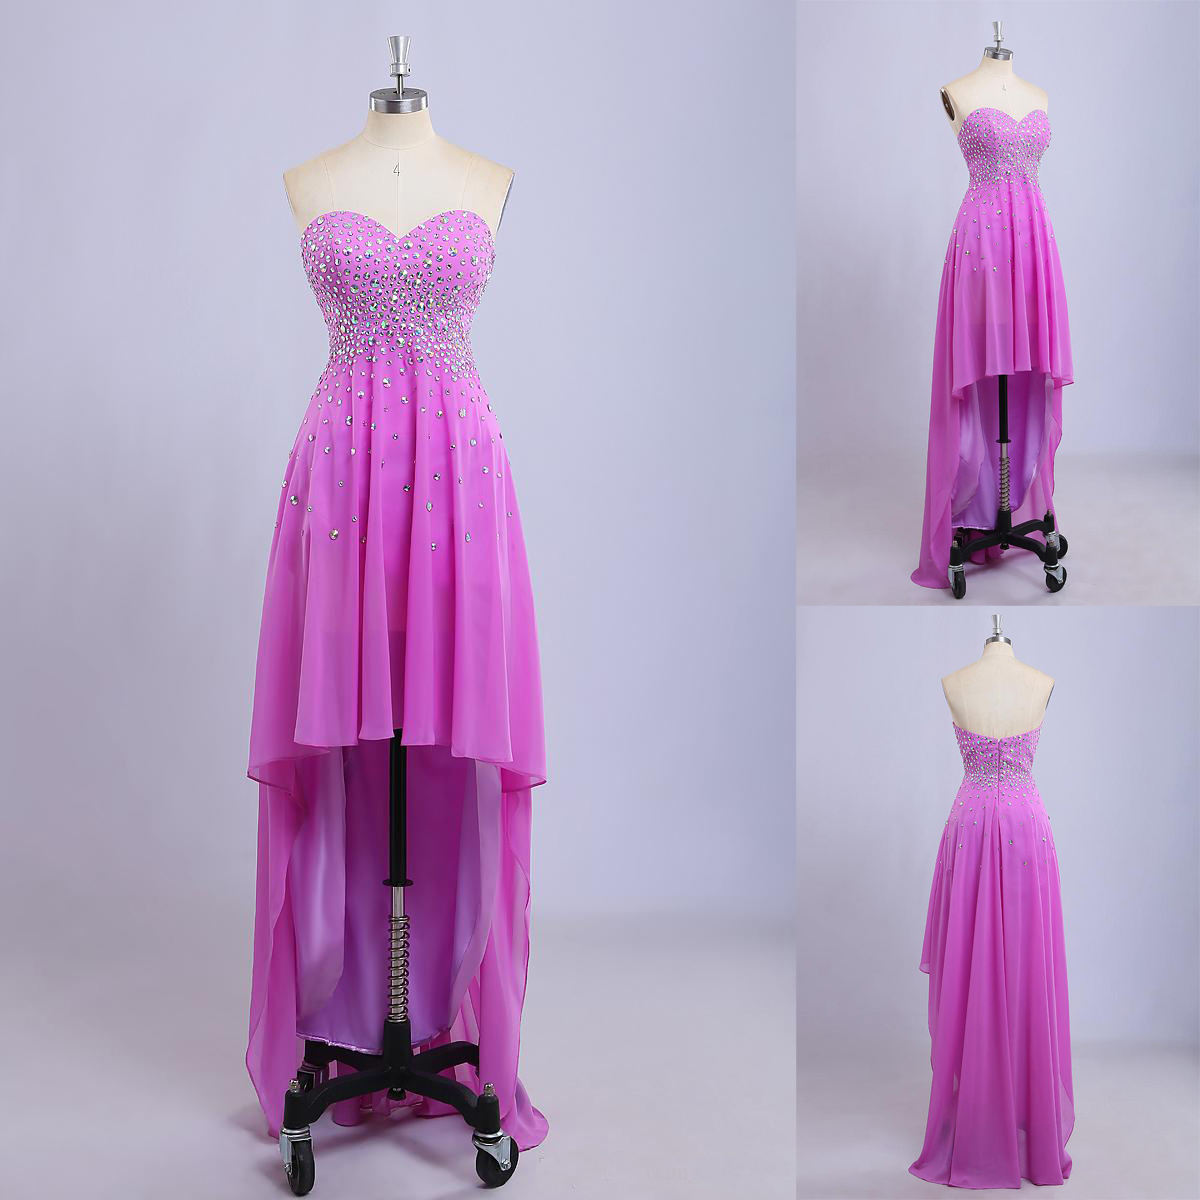 Pink Chiffon High Low Formal Dresses Featuring Ab Stones And Sweetheart Neckline - Prom Dresses,party Dress